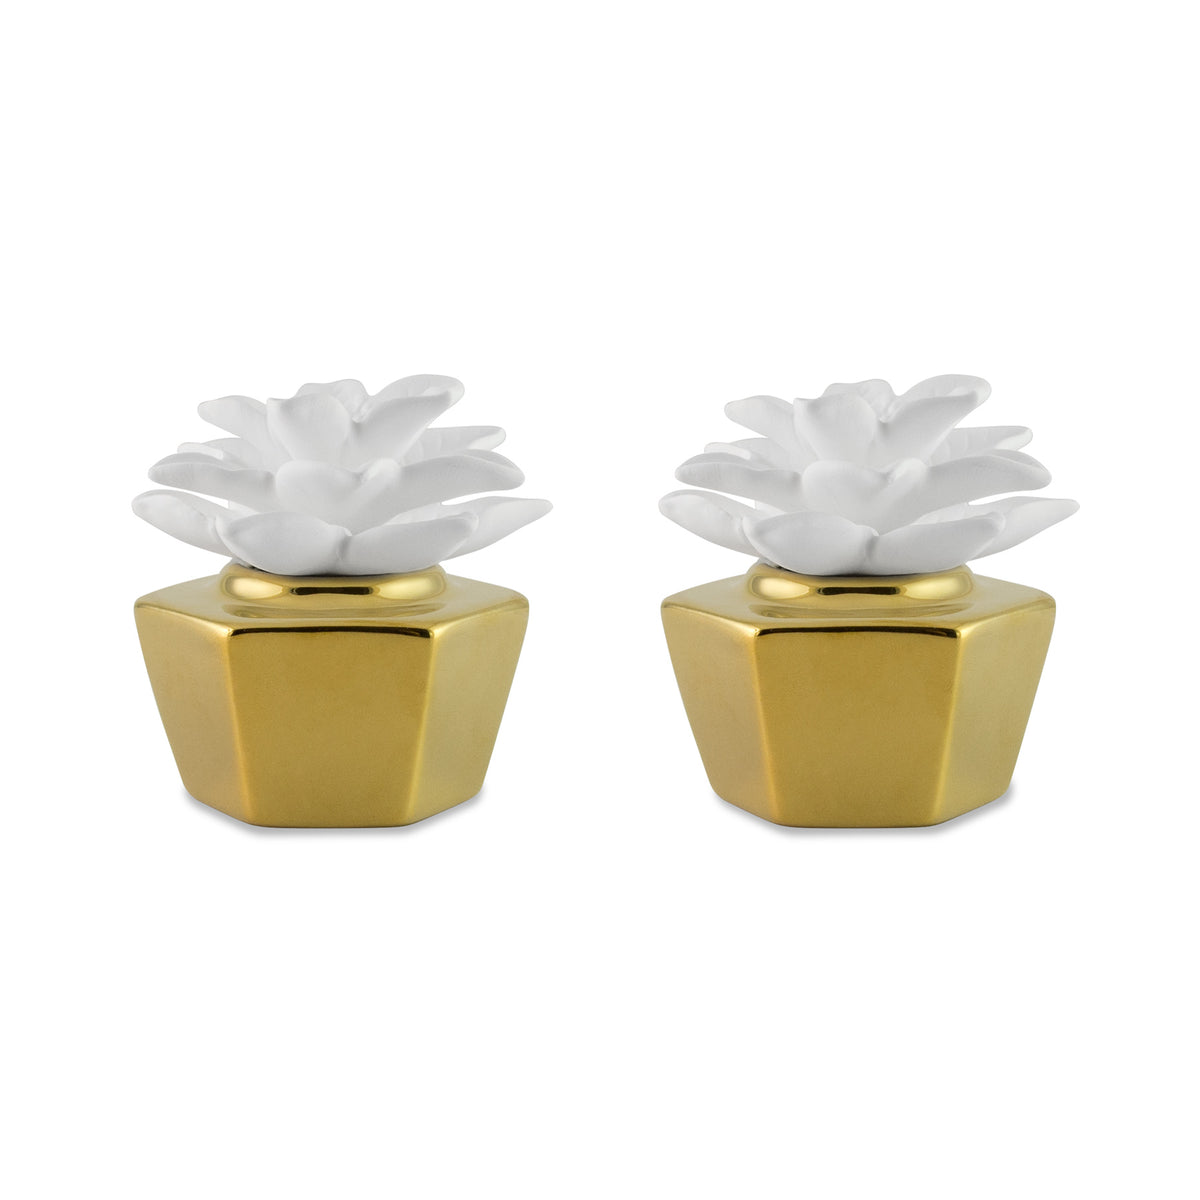 Elegance Gold Clay Diffuser Set of 2 - HYSSES